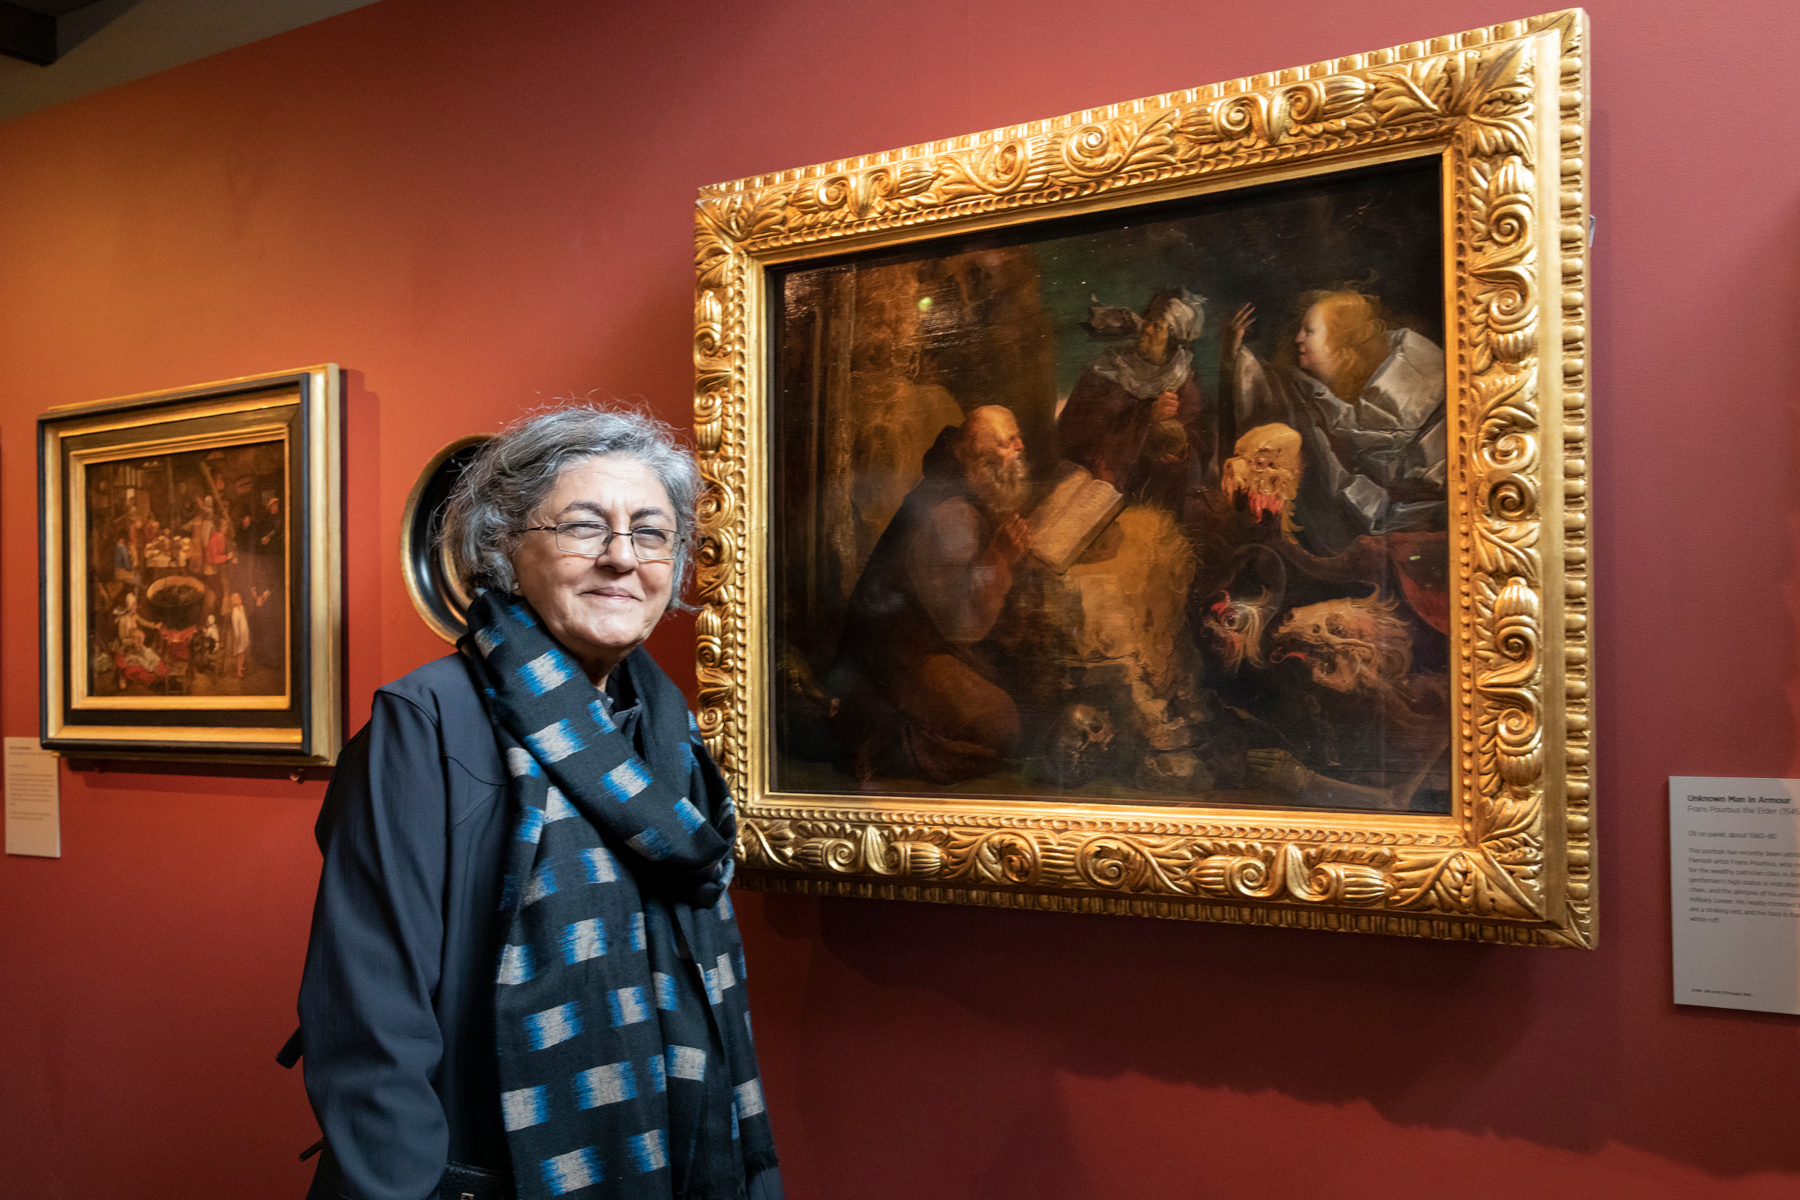 Nalini Malani in front of Jan van der Venne’s The Temptation of St Anthony at the Holburne Museum, Bath